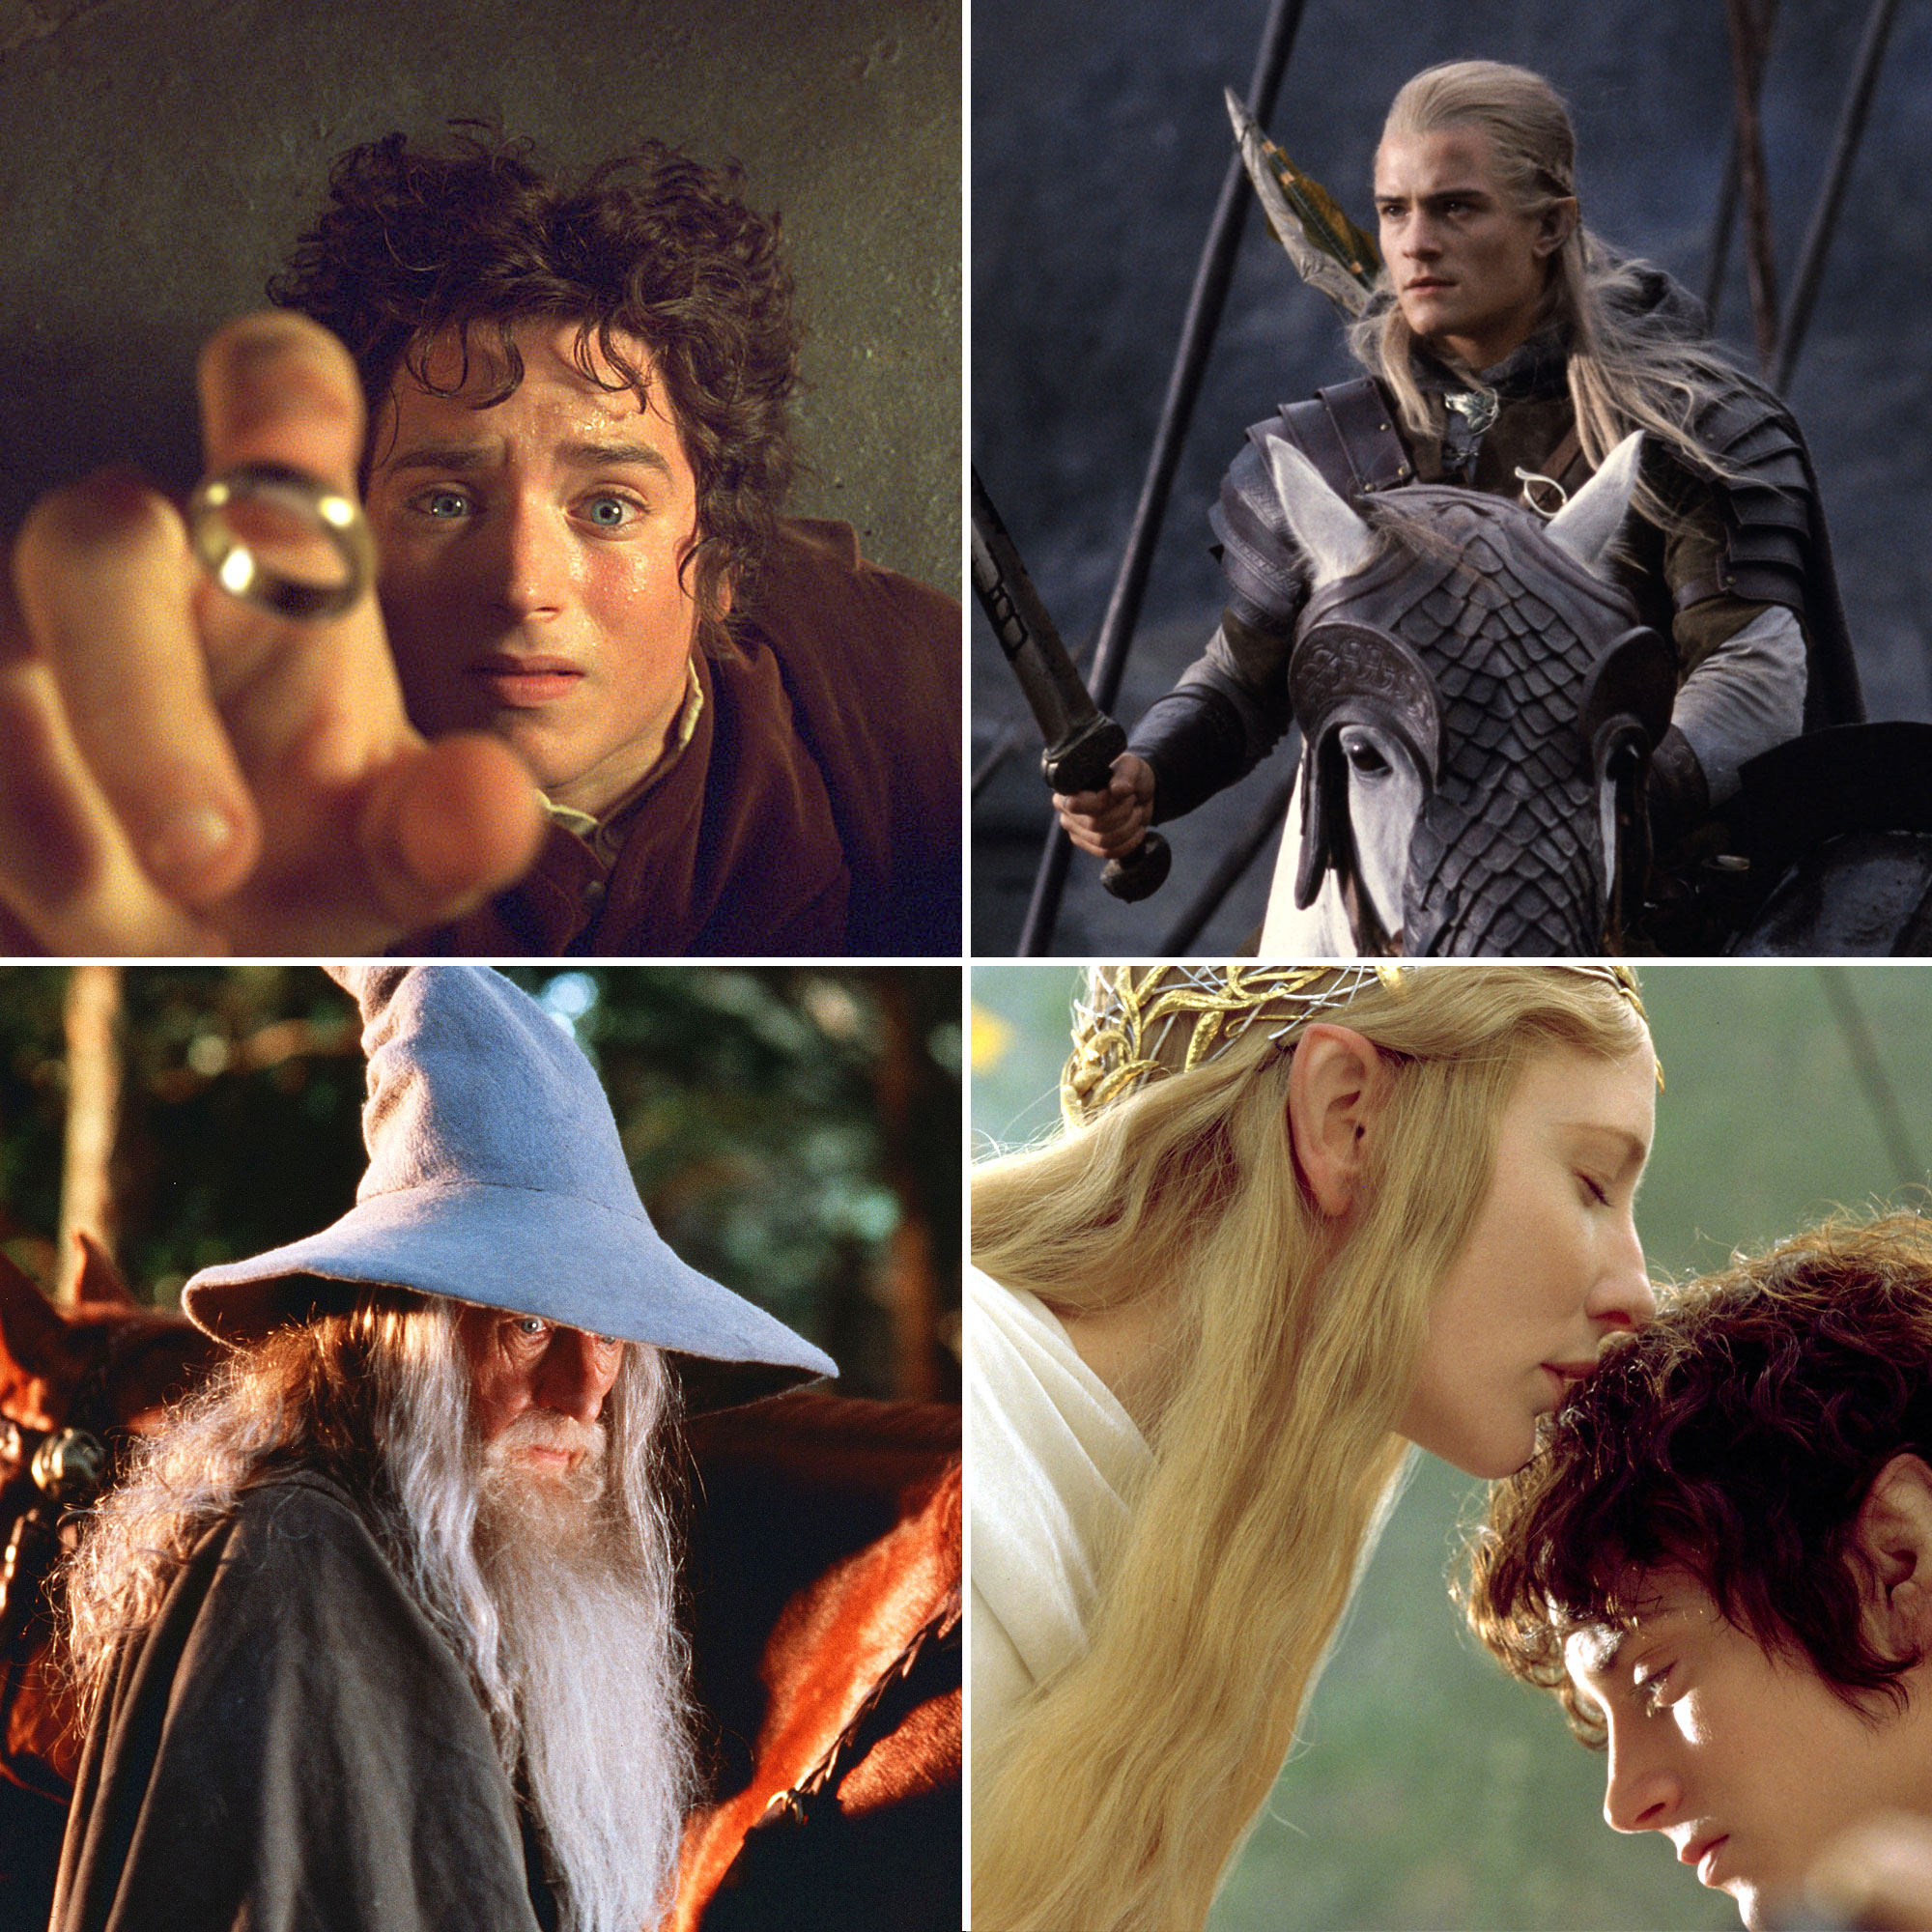 How To Watch The Lord Of The Rings & Hobbit Movies In Order